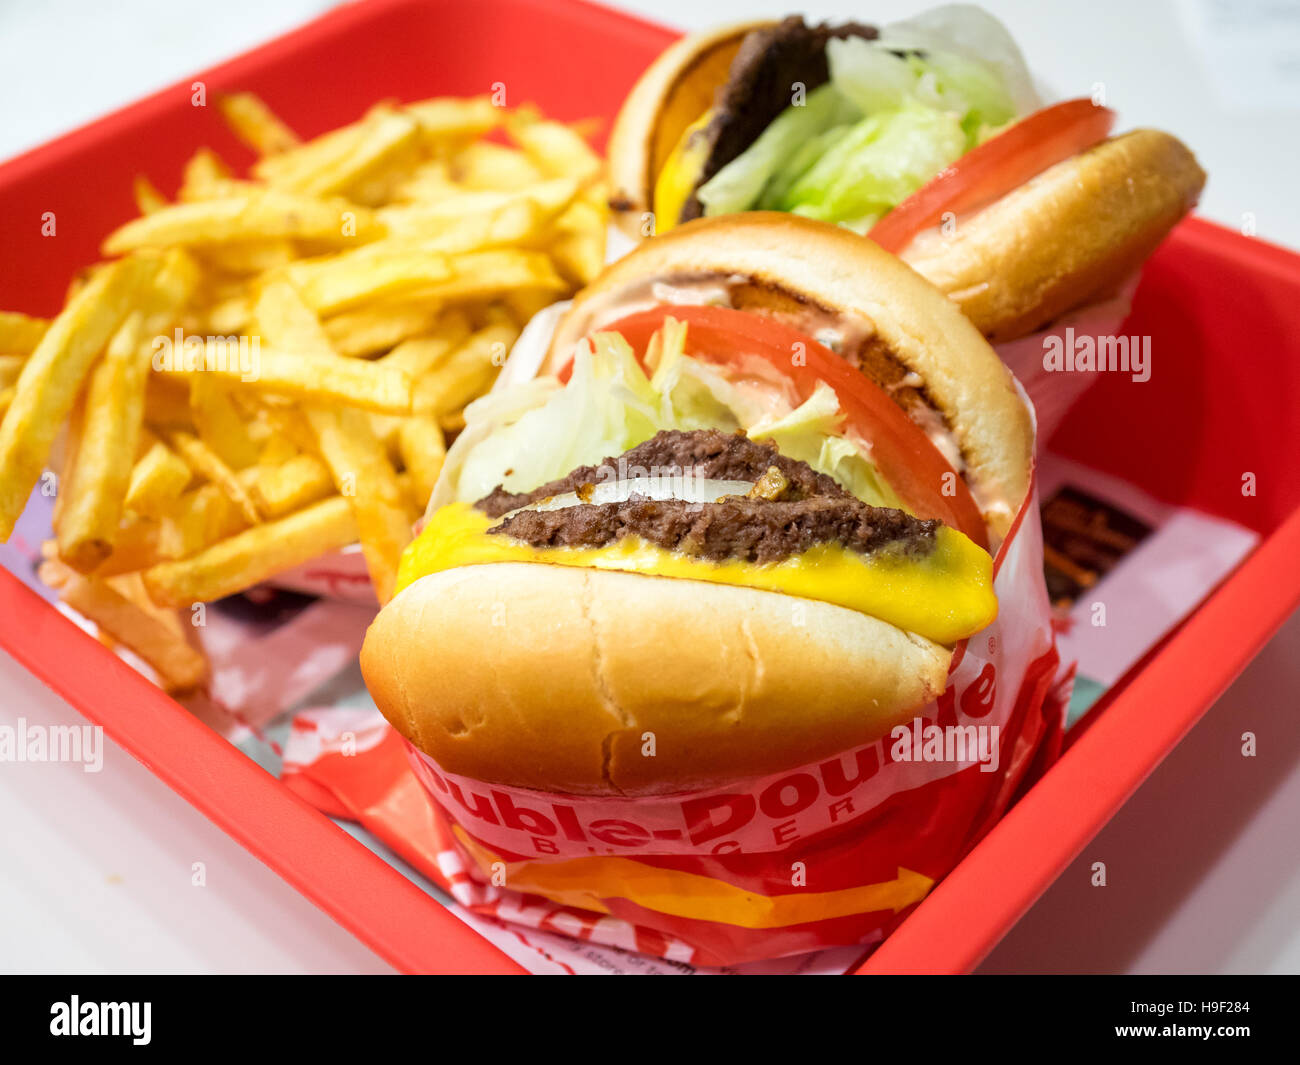 A 'double-double' cheeseburger (foreground), cheeseburger (background), and French fries from In-N-Out Burger in San Francisco. Stock Photo